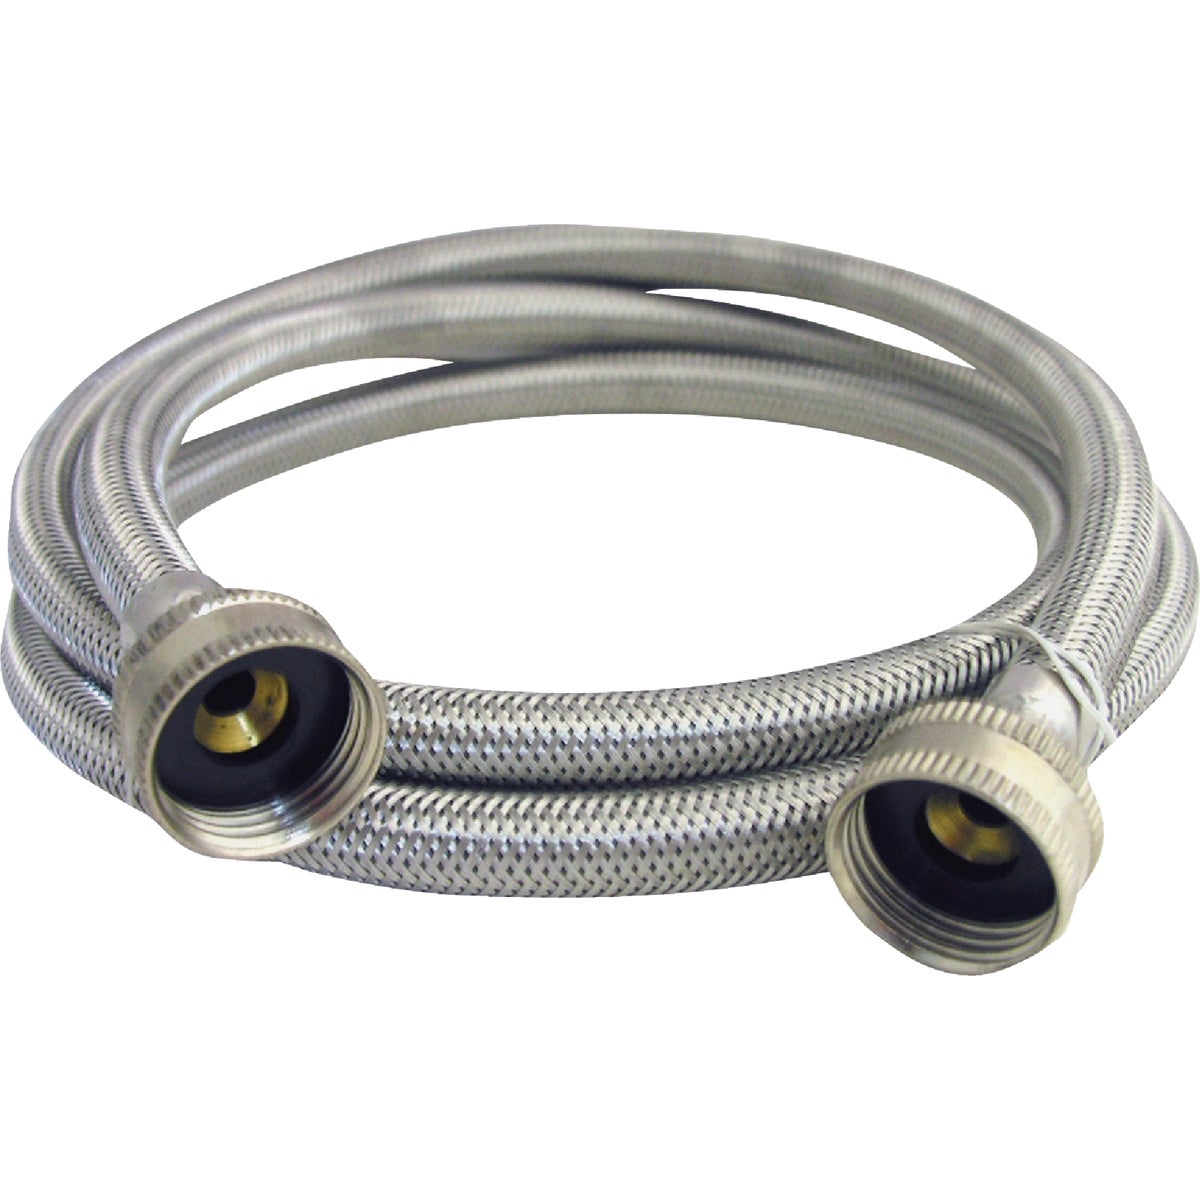 Lasco 3/4 In. x 5 Ft. Stainless Steel Washing Machine Hose